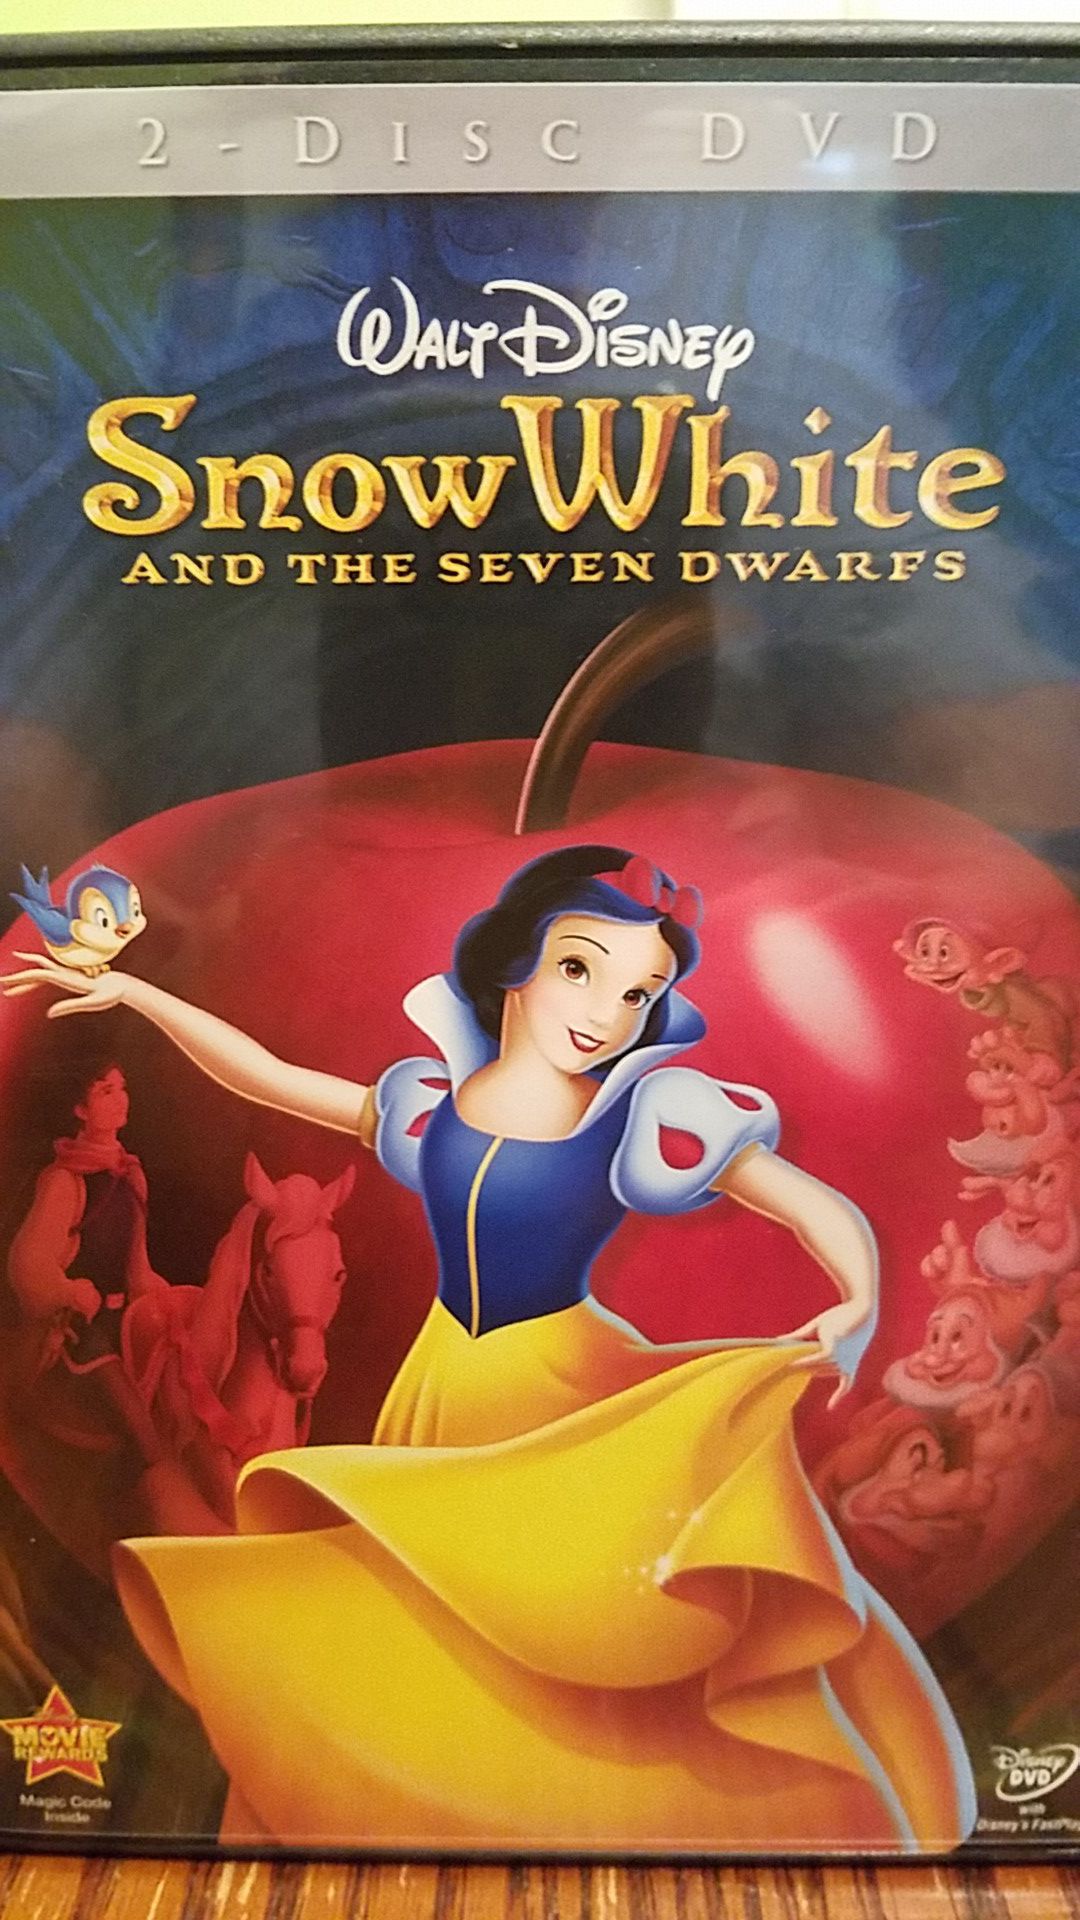 Snow White and the Seven Dwarfs DVD